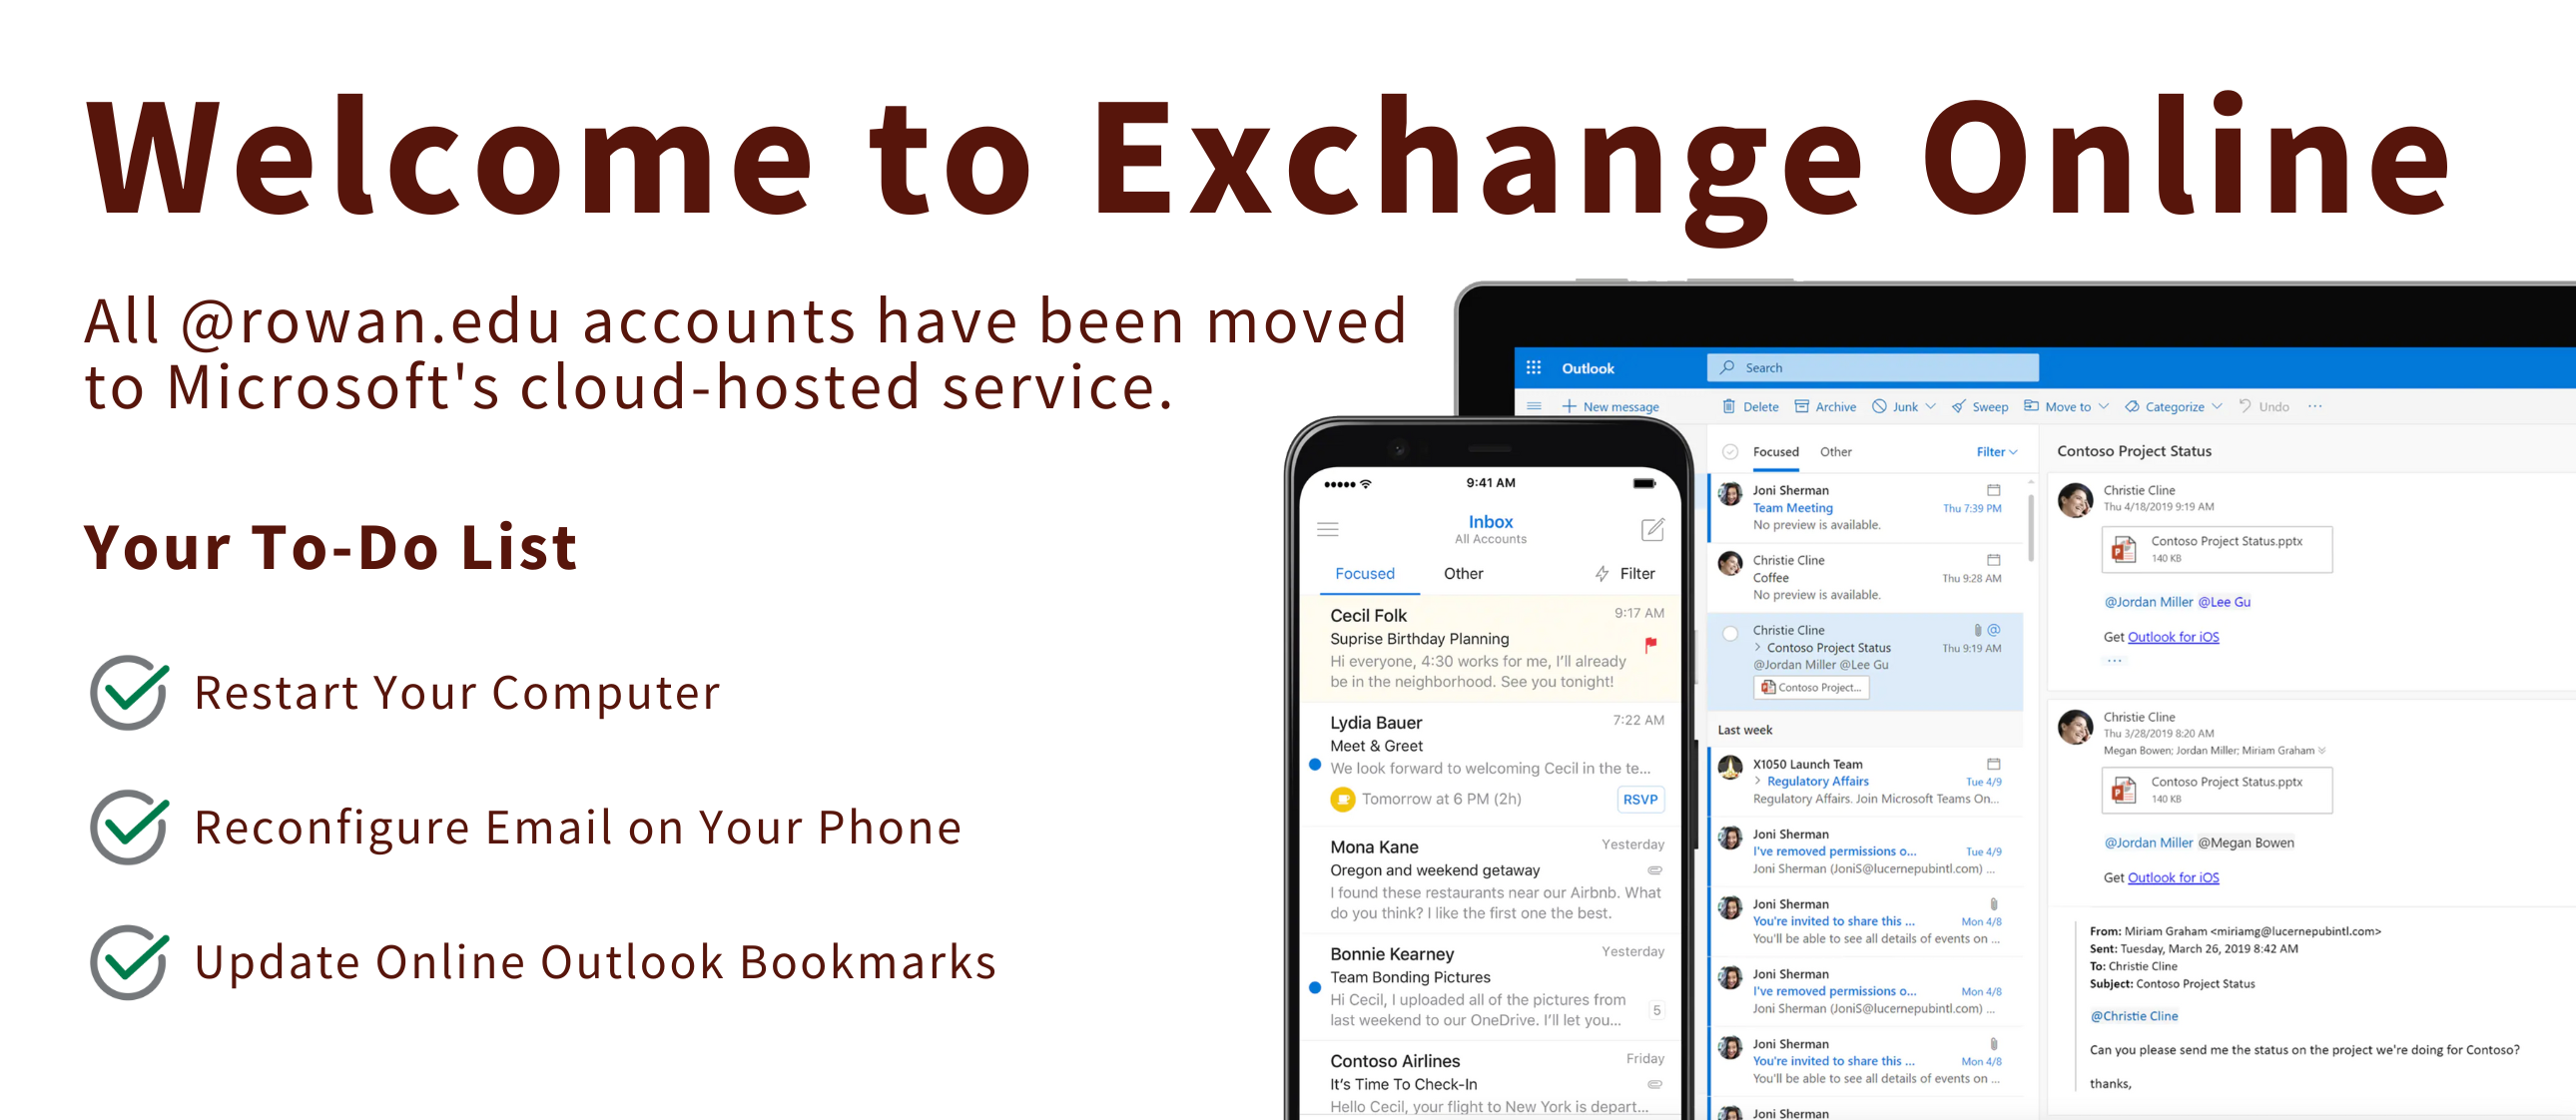 welcome to exchange online